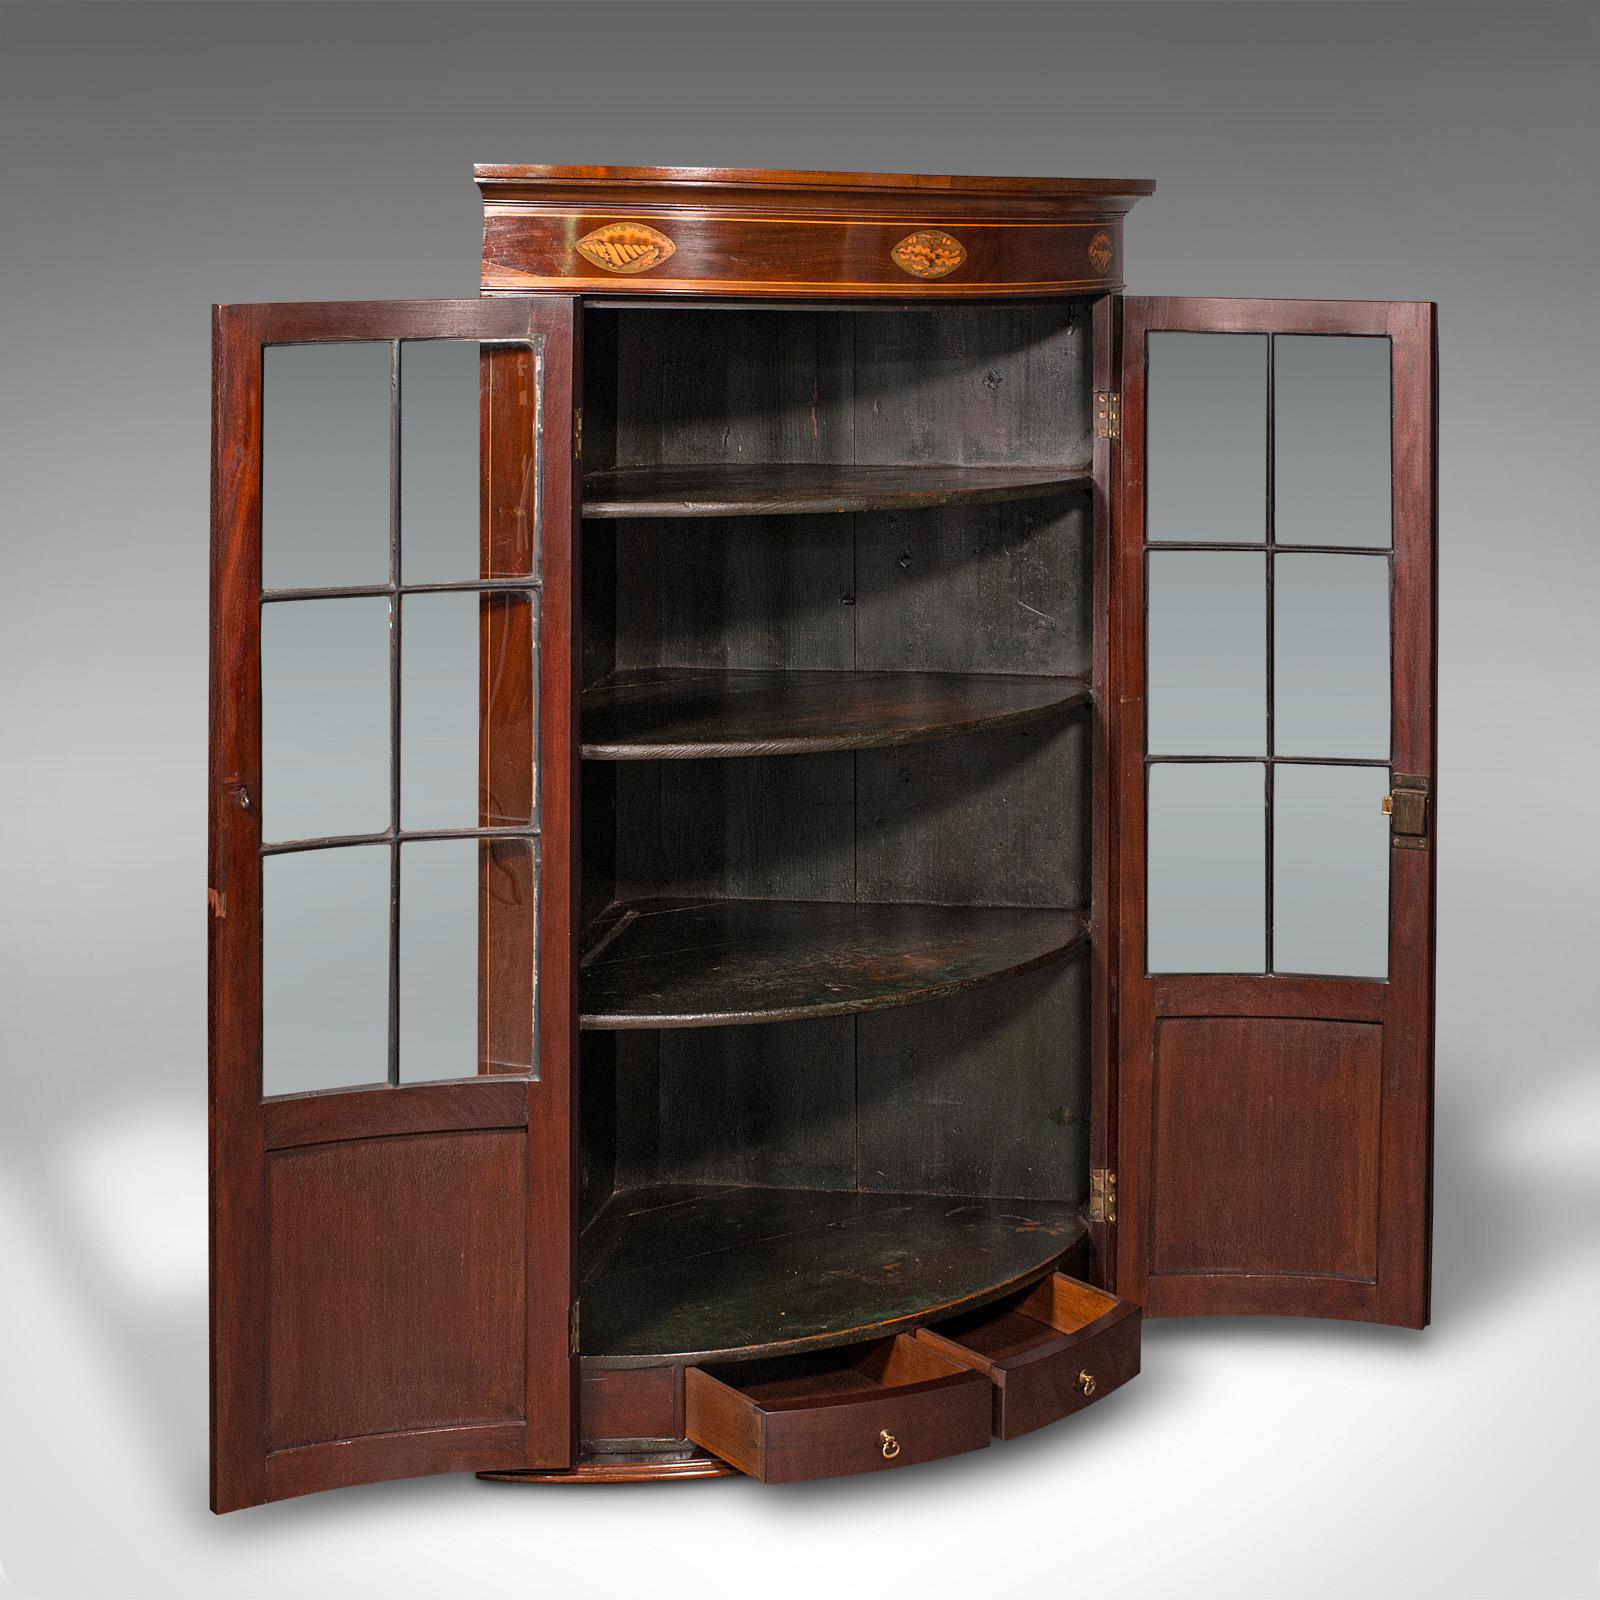 This is an antique glazed corner cabinet. An English, mahogany and glass bow front display cupboard, dating to the Georgian period, circa 1800.

Striking cabinetry with delightful glazing and inlaid detail
Displaying a desirable aged patina and in